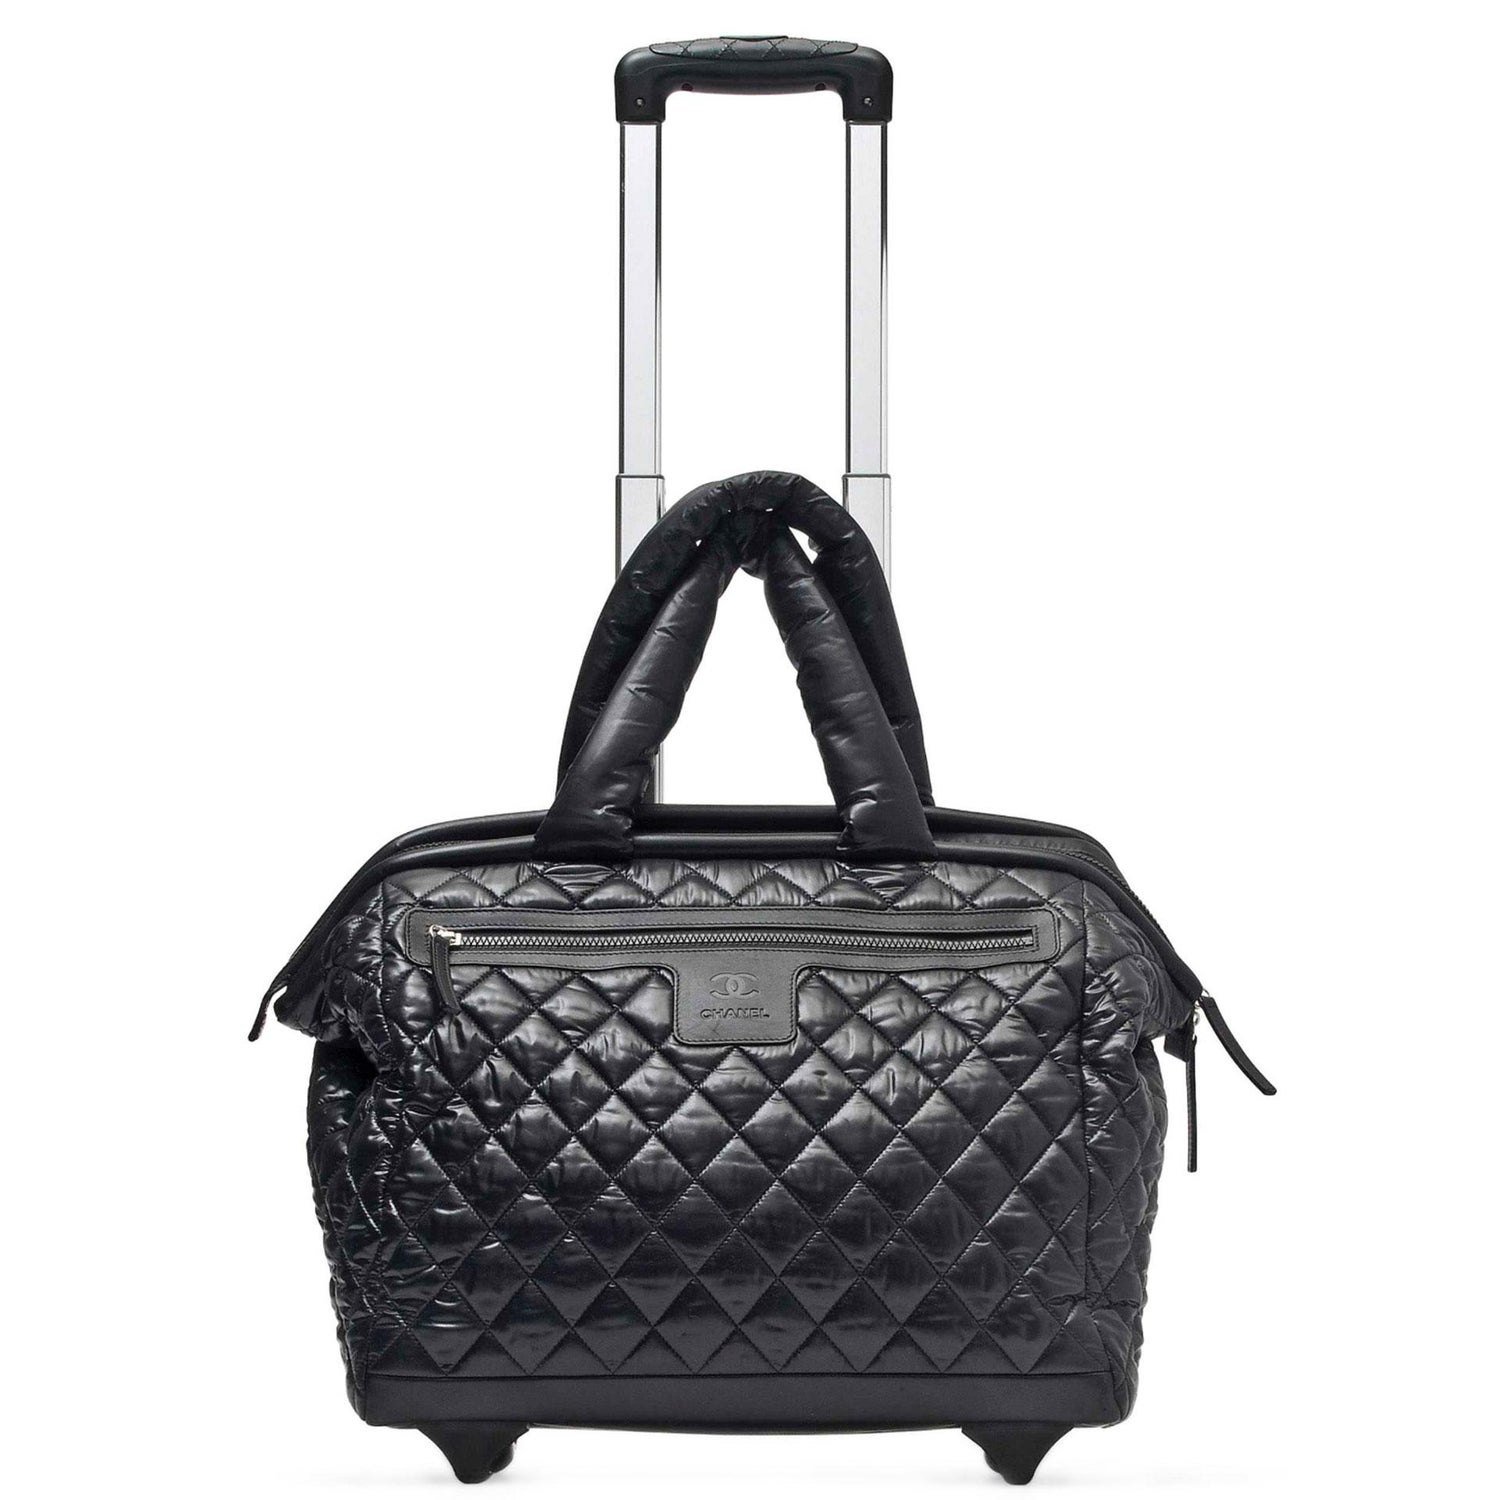 Chanel Rolling Luggage - 3 For Sale on 1stDibs